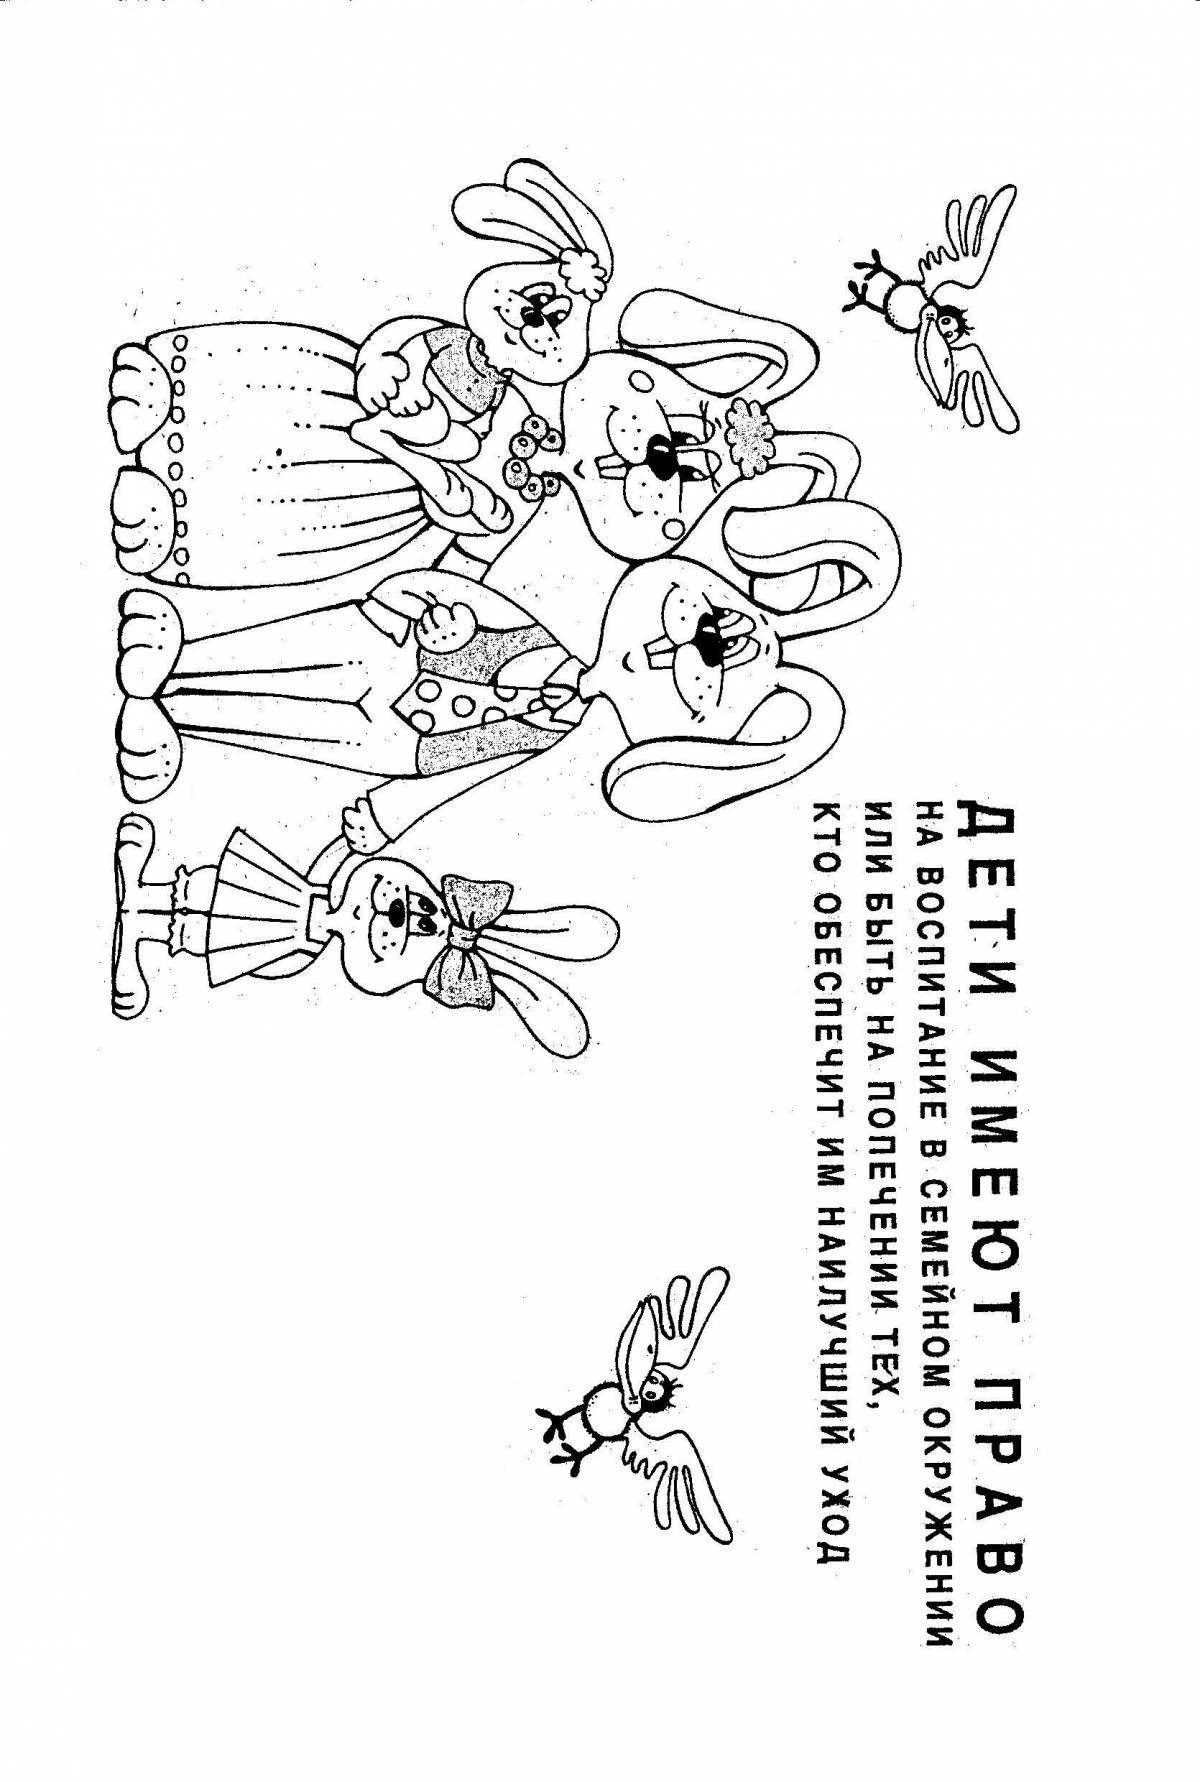 Children's rights coloring page